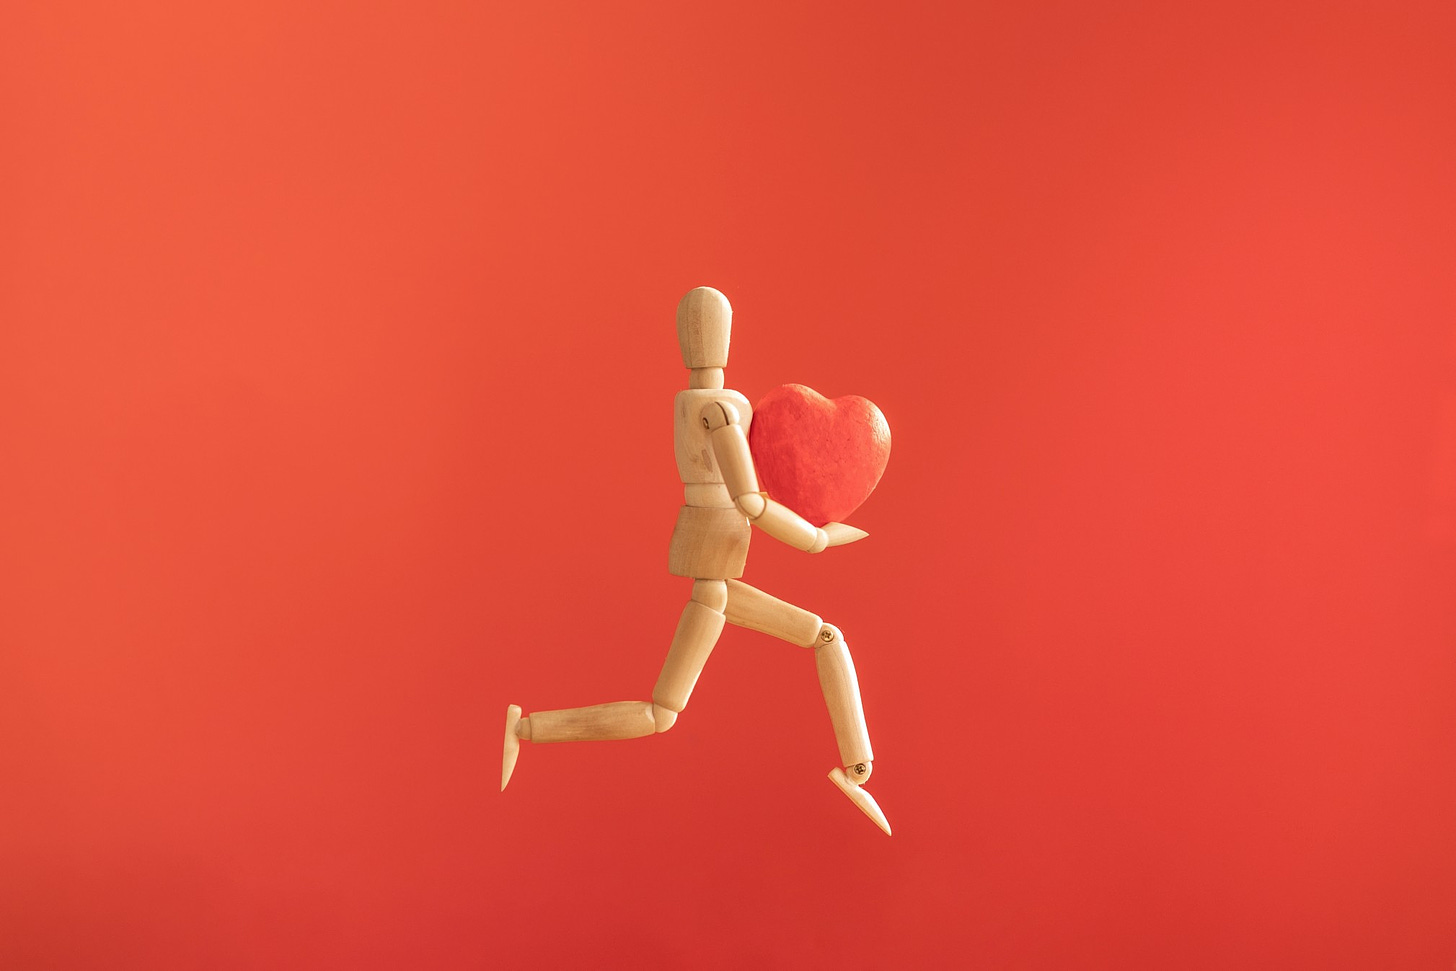 A wooden modeling figure poses in a jumping motion while holding a large heart (against a red background).